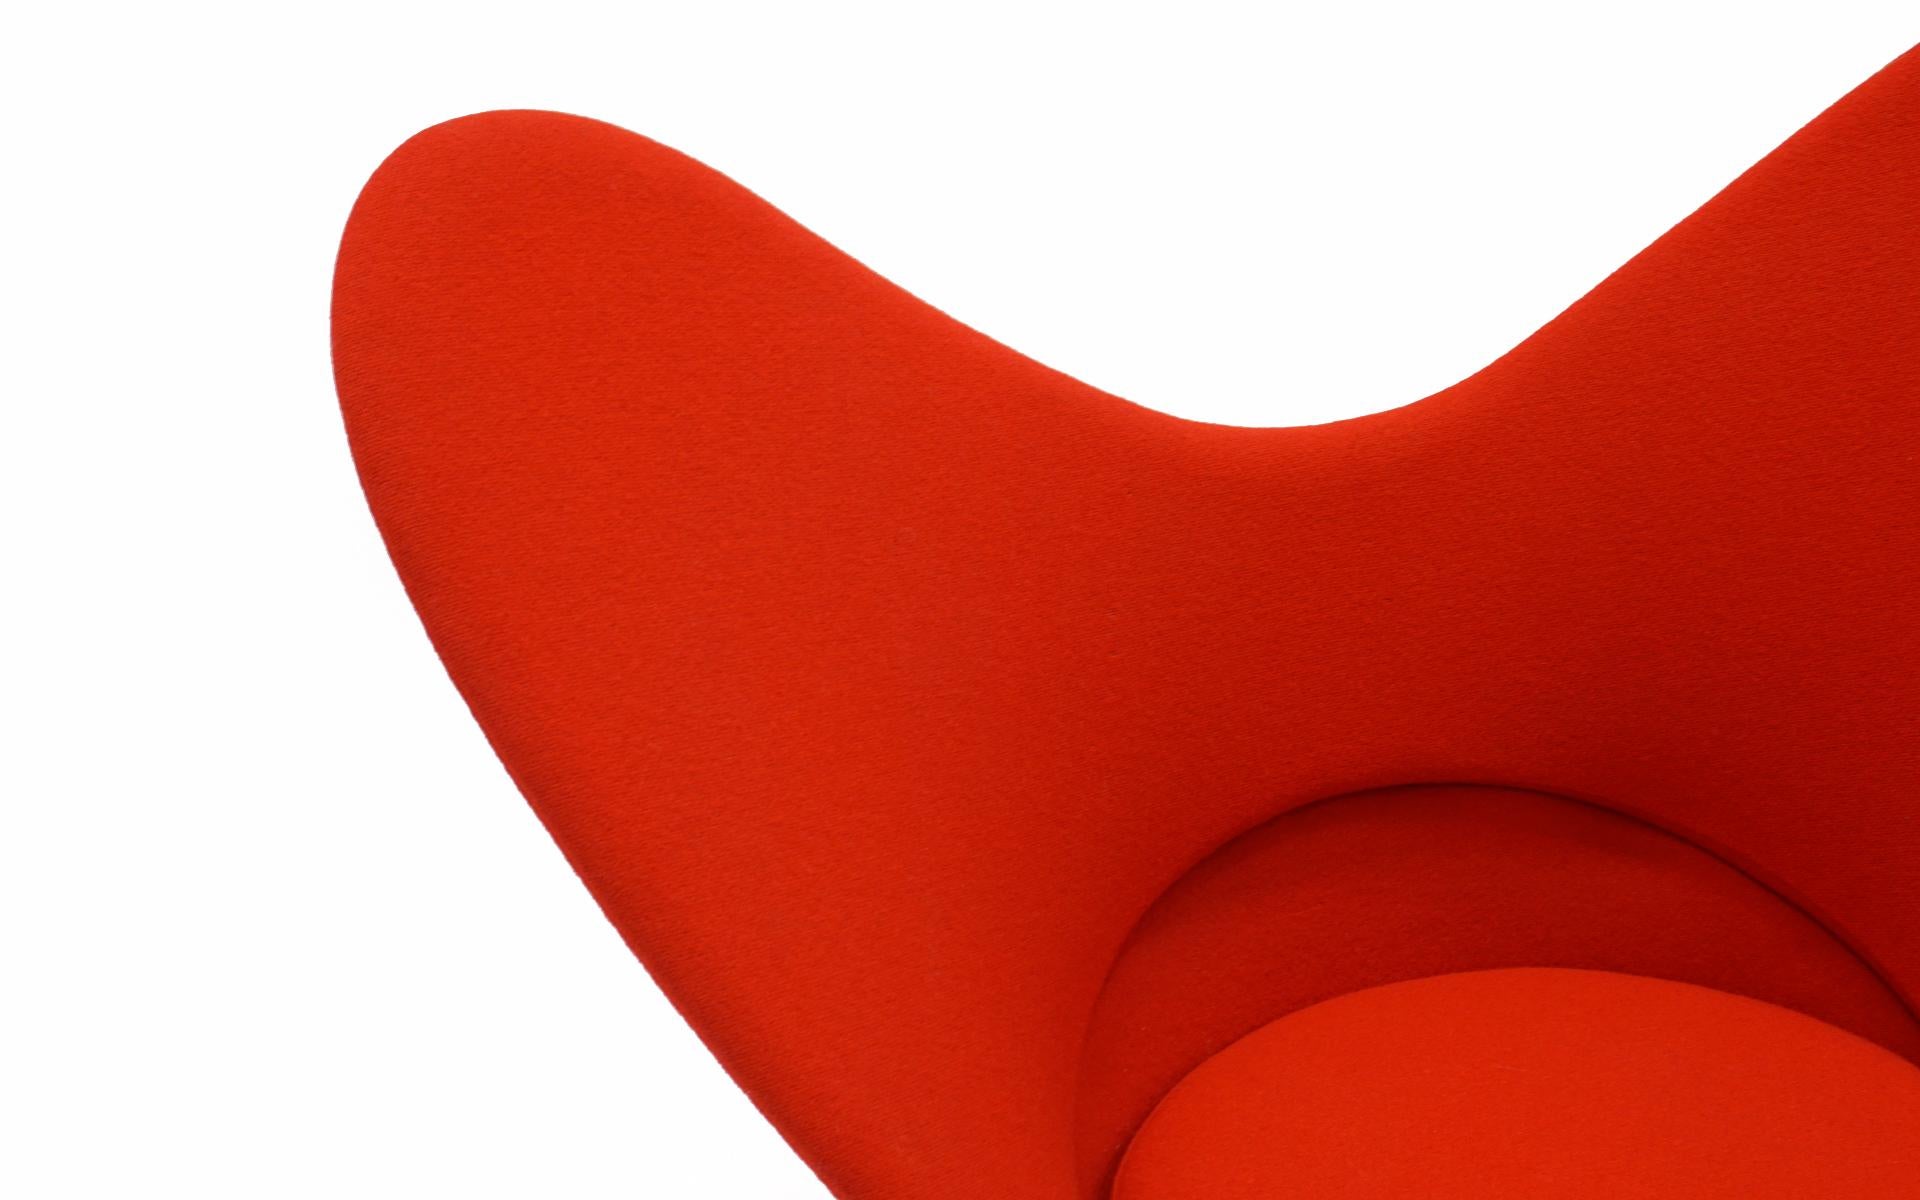 Aluminum Red Heart Chair by Verner Panton for Vitra, Great Condition